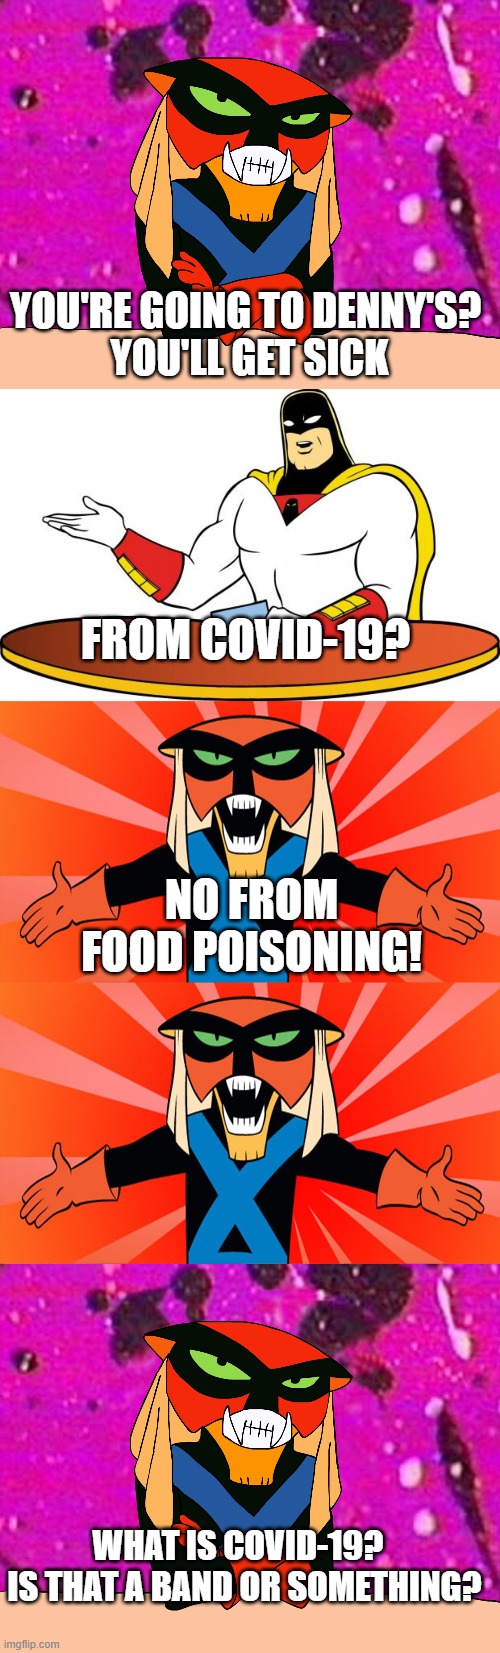 FROM COVID-19? YOU'RE GOING TO DENNY'S? 
YOU'LL GET SICK NO FROM FOOD POISONING! WHAT IS COVID-19?  
IS THAT A BAND OR SOMETHING? | image tagged in spaceghost,brak | made w/ Imgflip meme maker